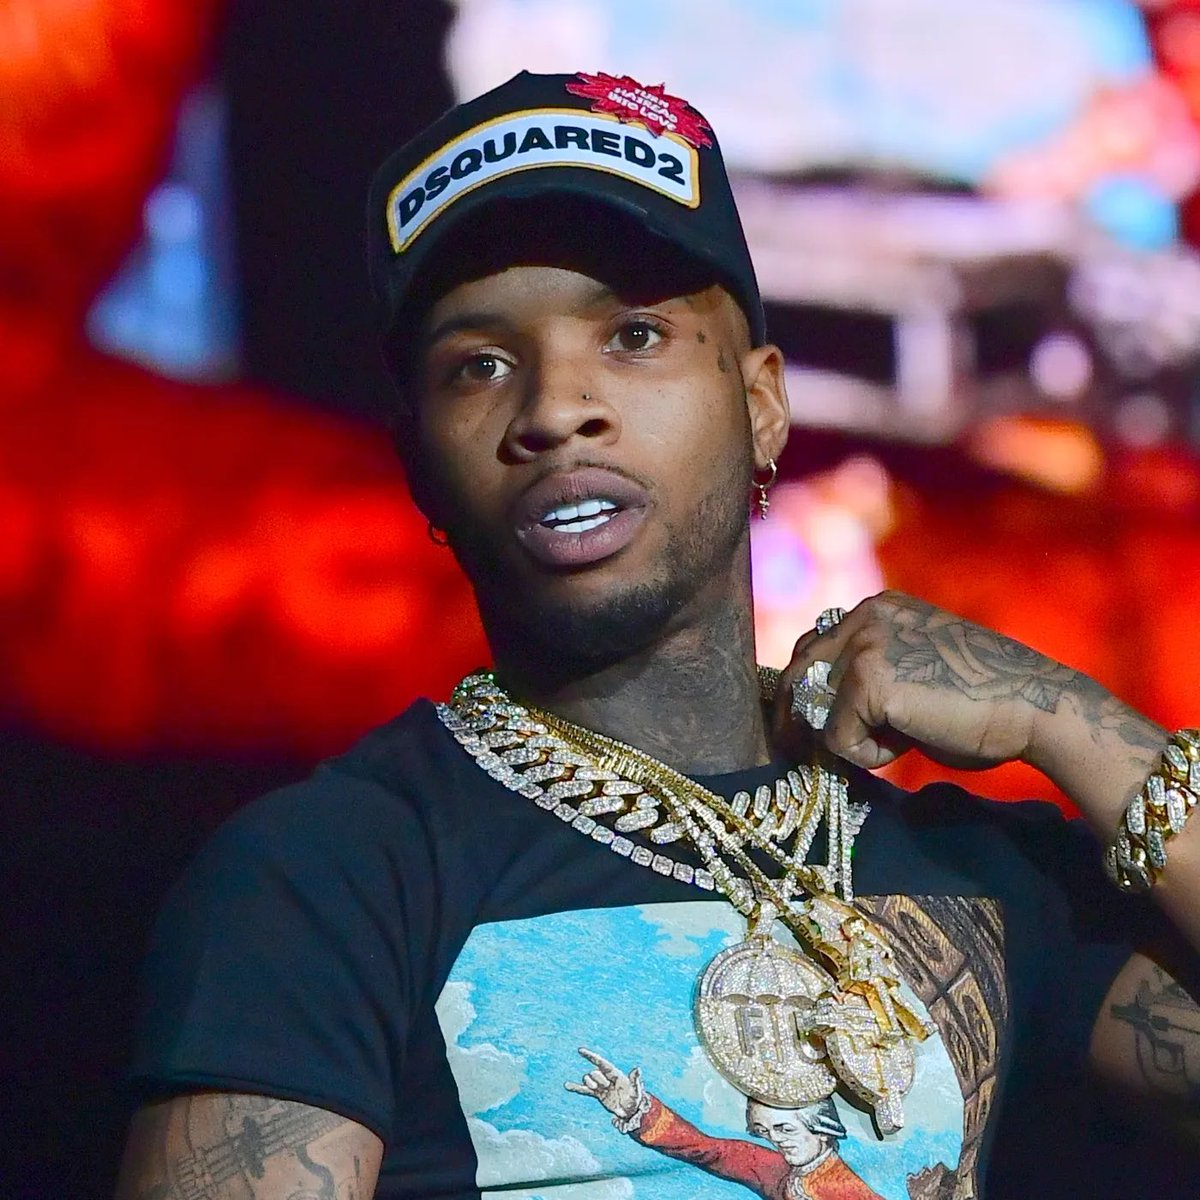 #ToryLanez sentenced to 10 years imprisonment for shooting Megan Thee Stallion in 2020